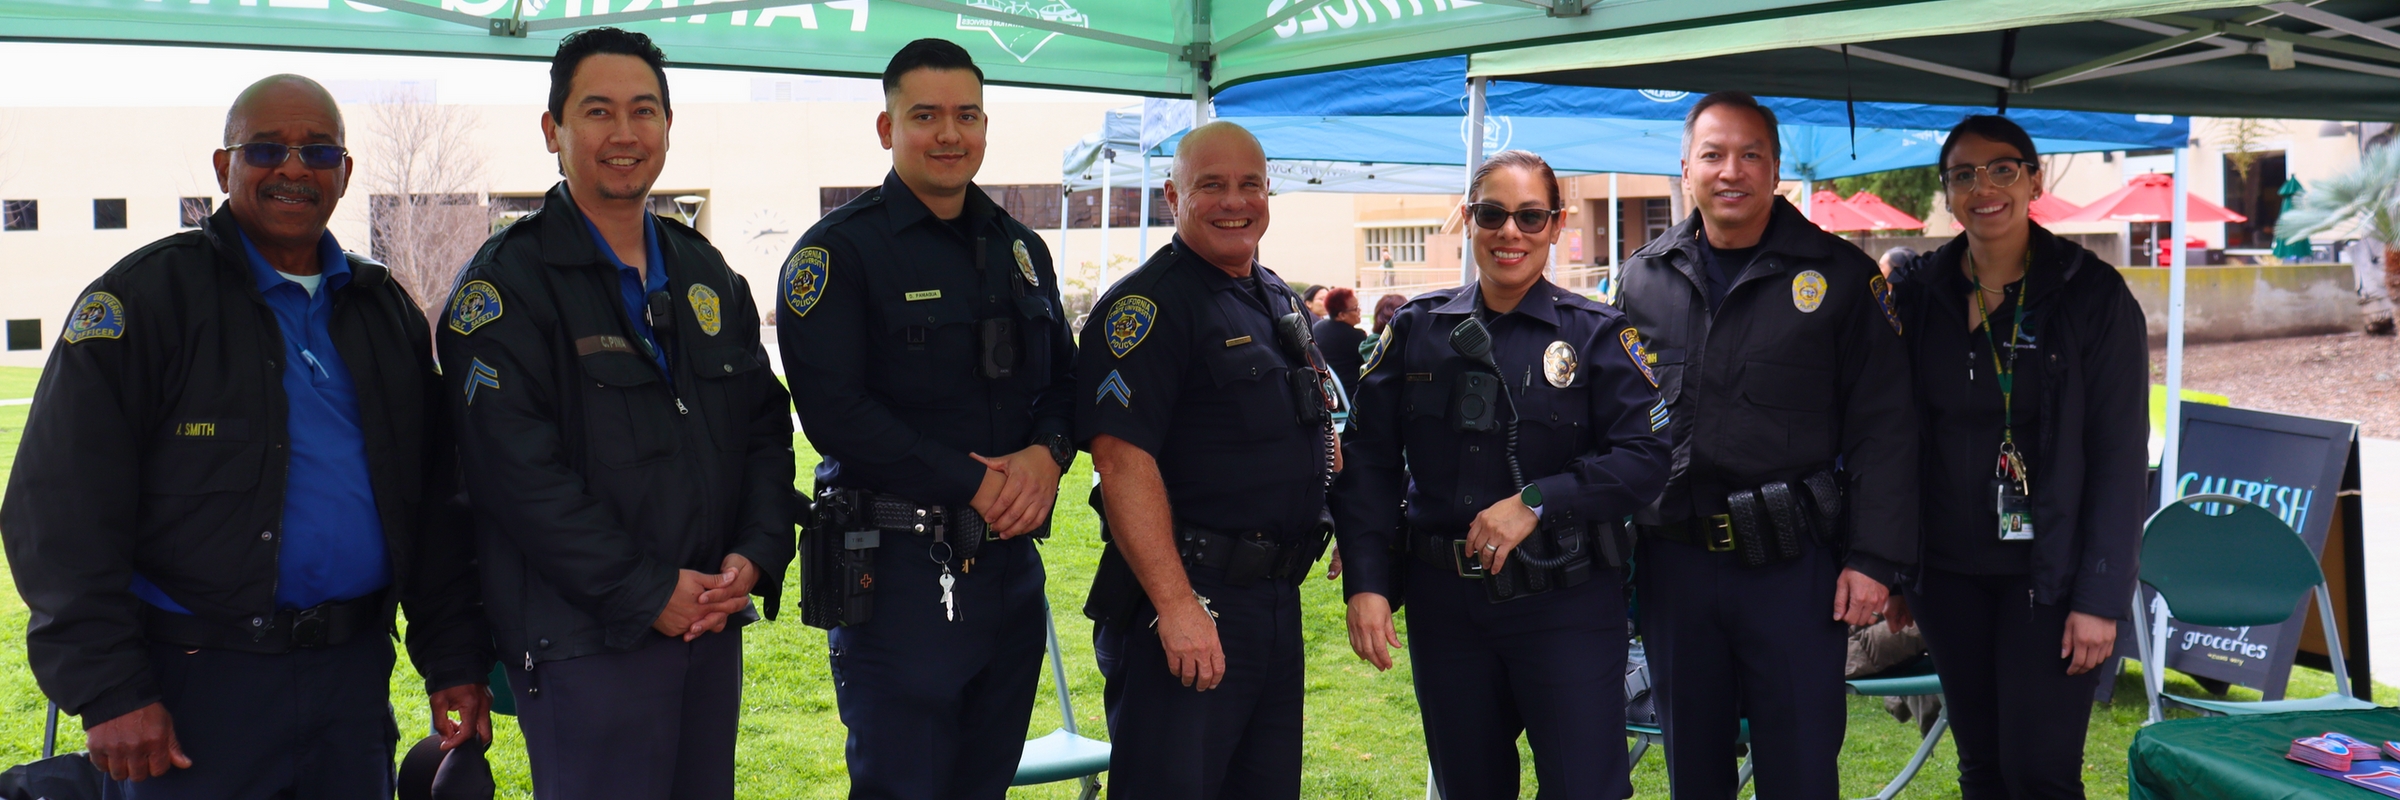 Officers at the Spring Safety Fair